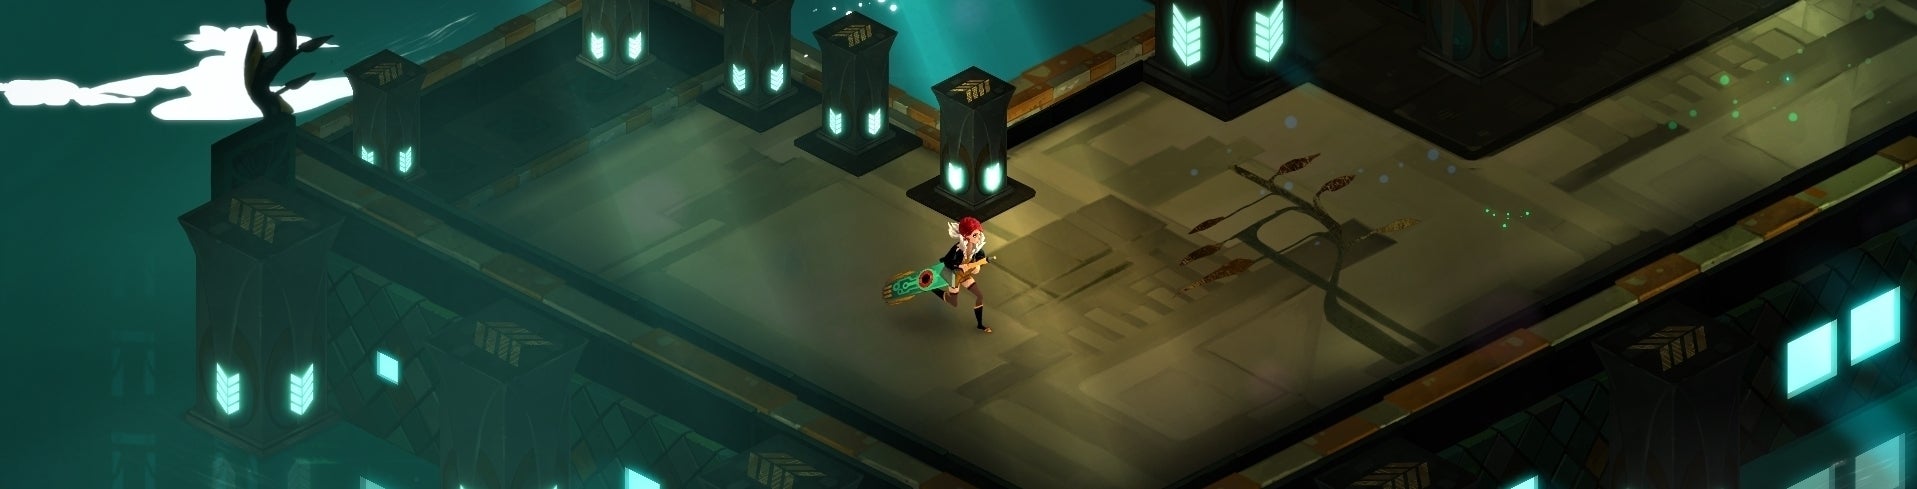 Image for Transistor preview: Supergiant's bold, futuristic follow-up to Bastion